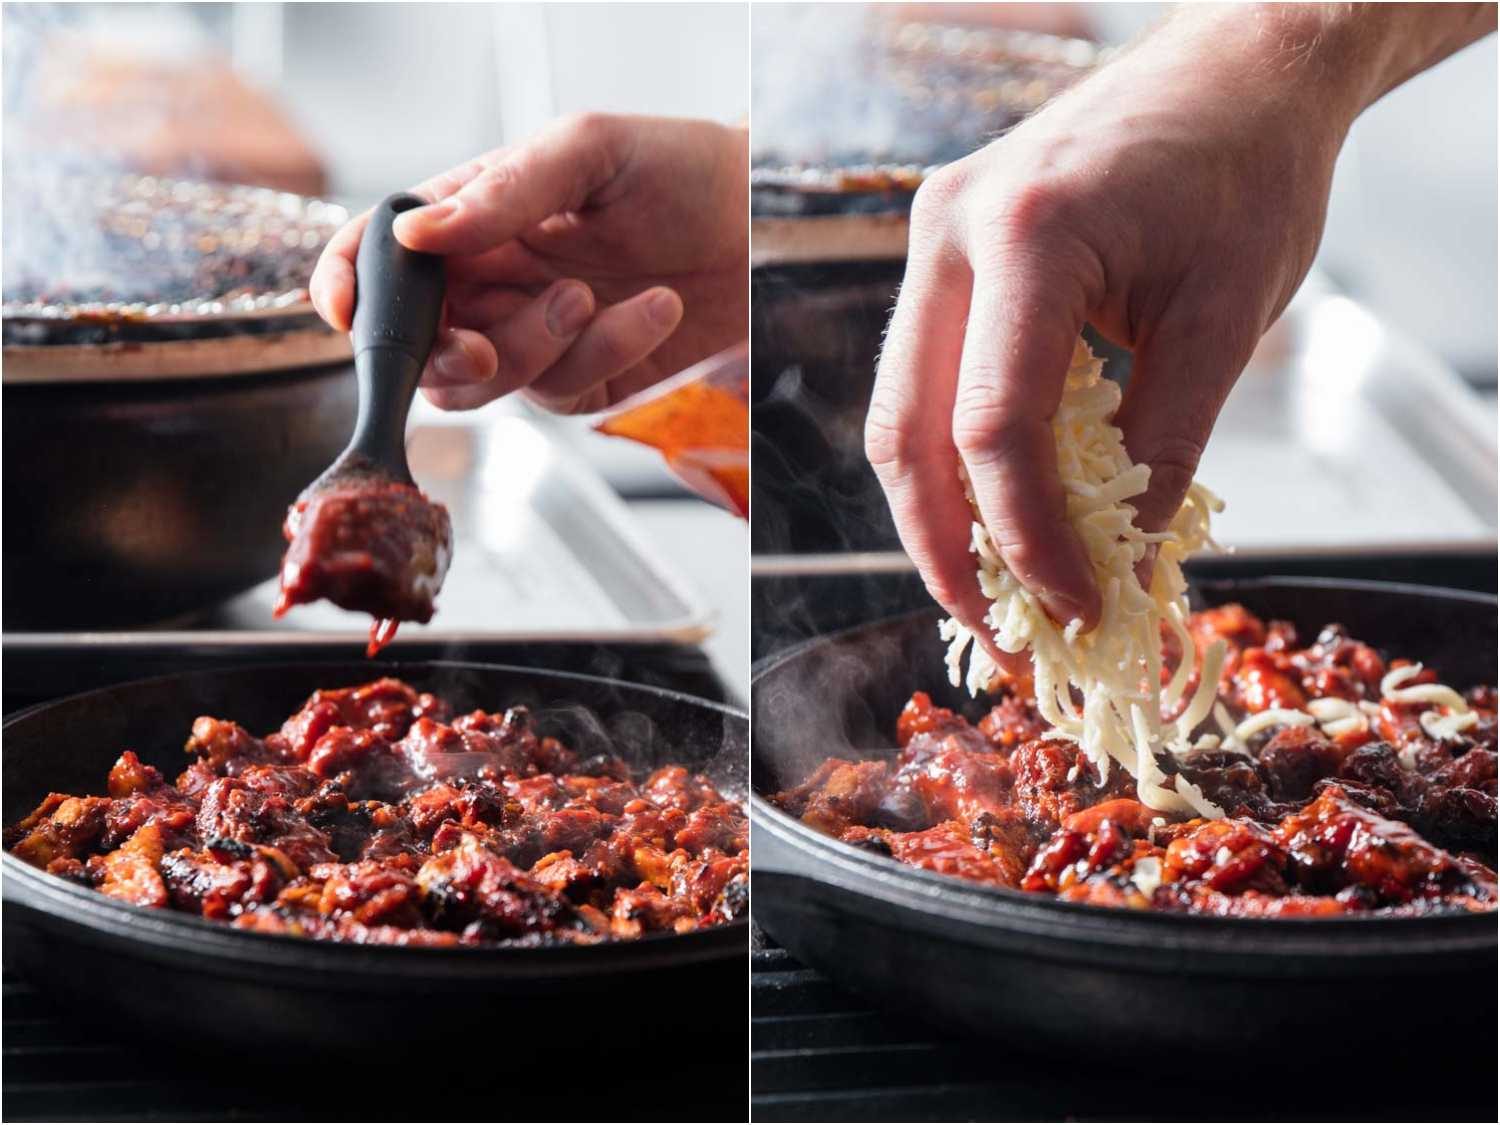 Process shots of sprinkling cheese over skillet of chicken